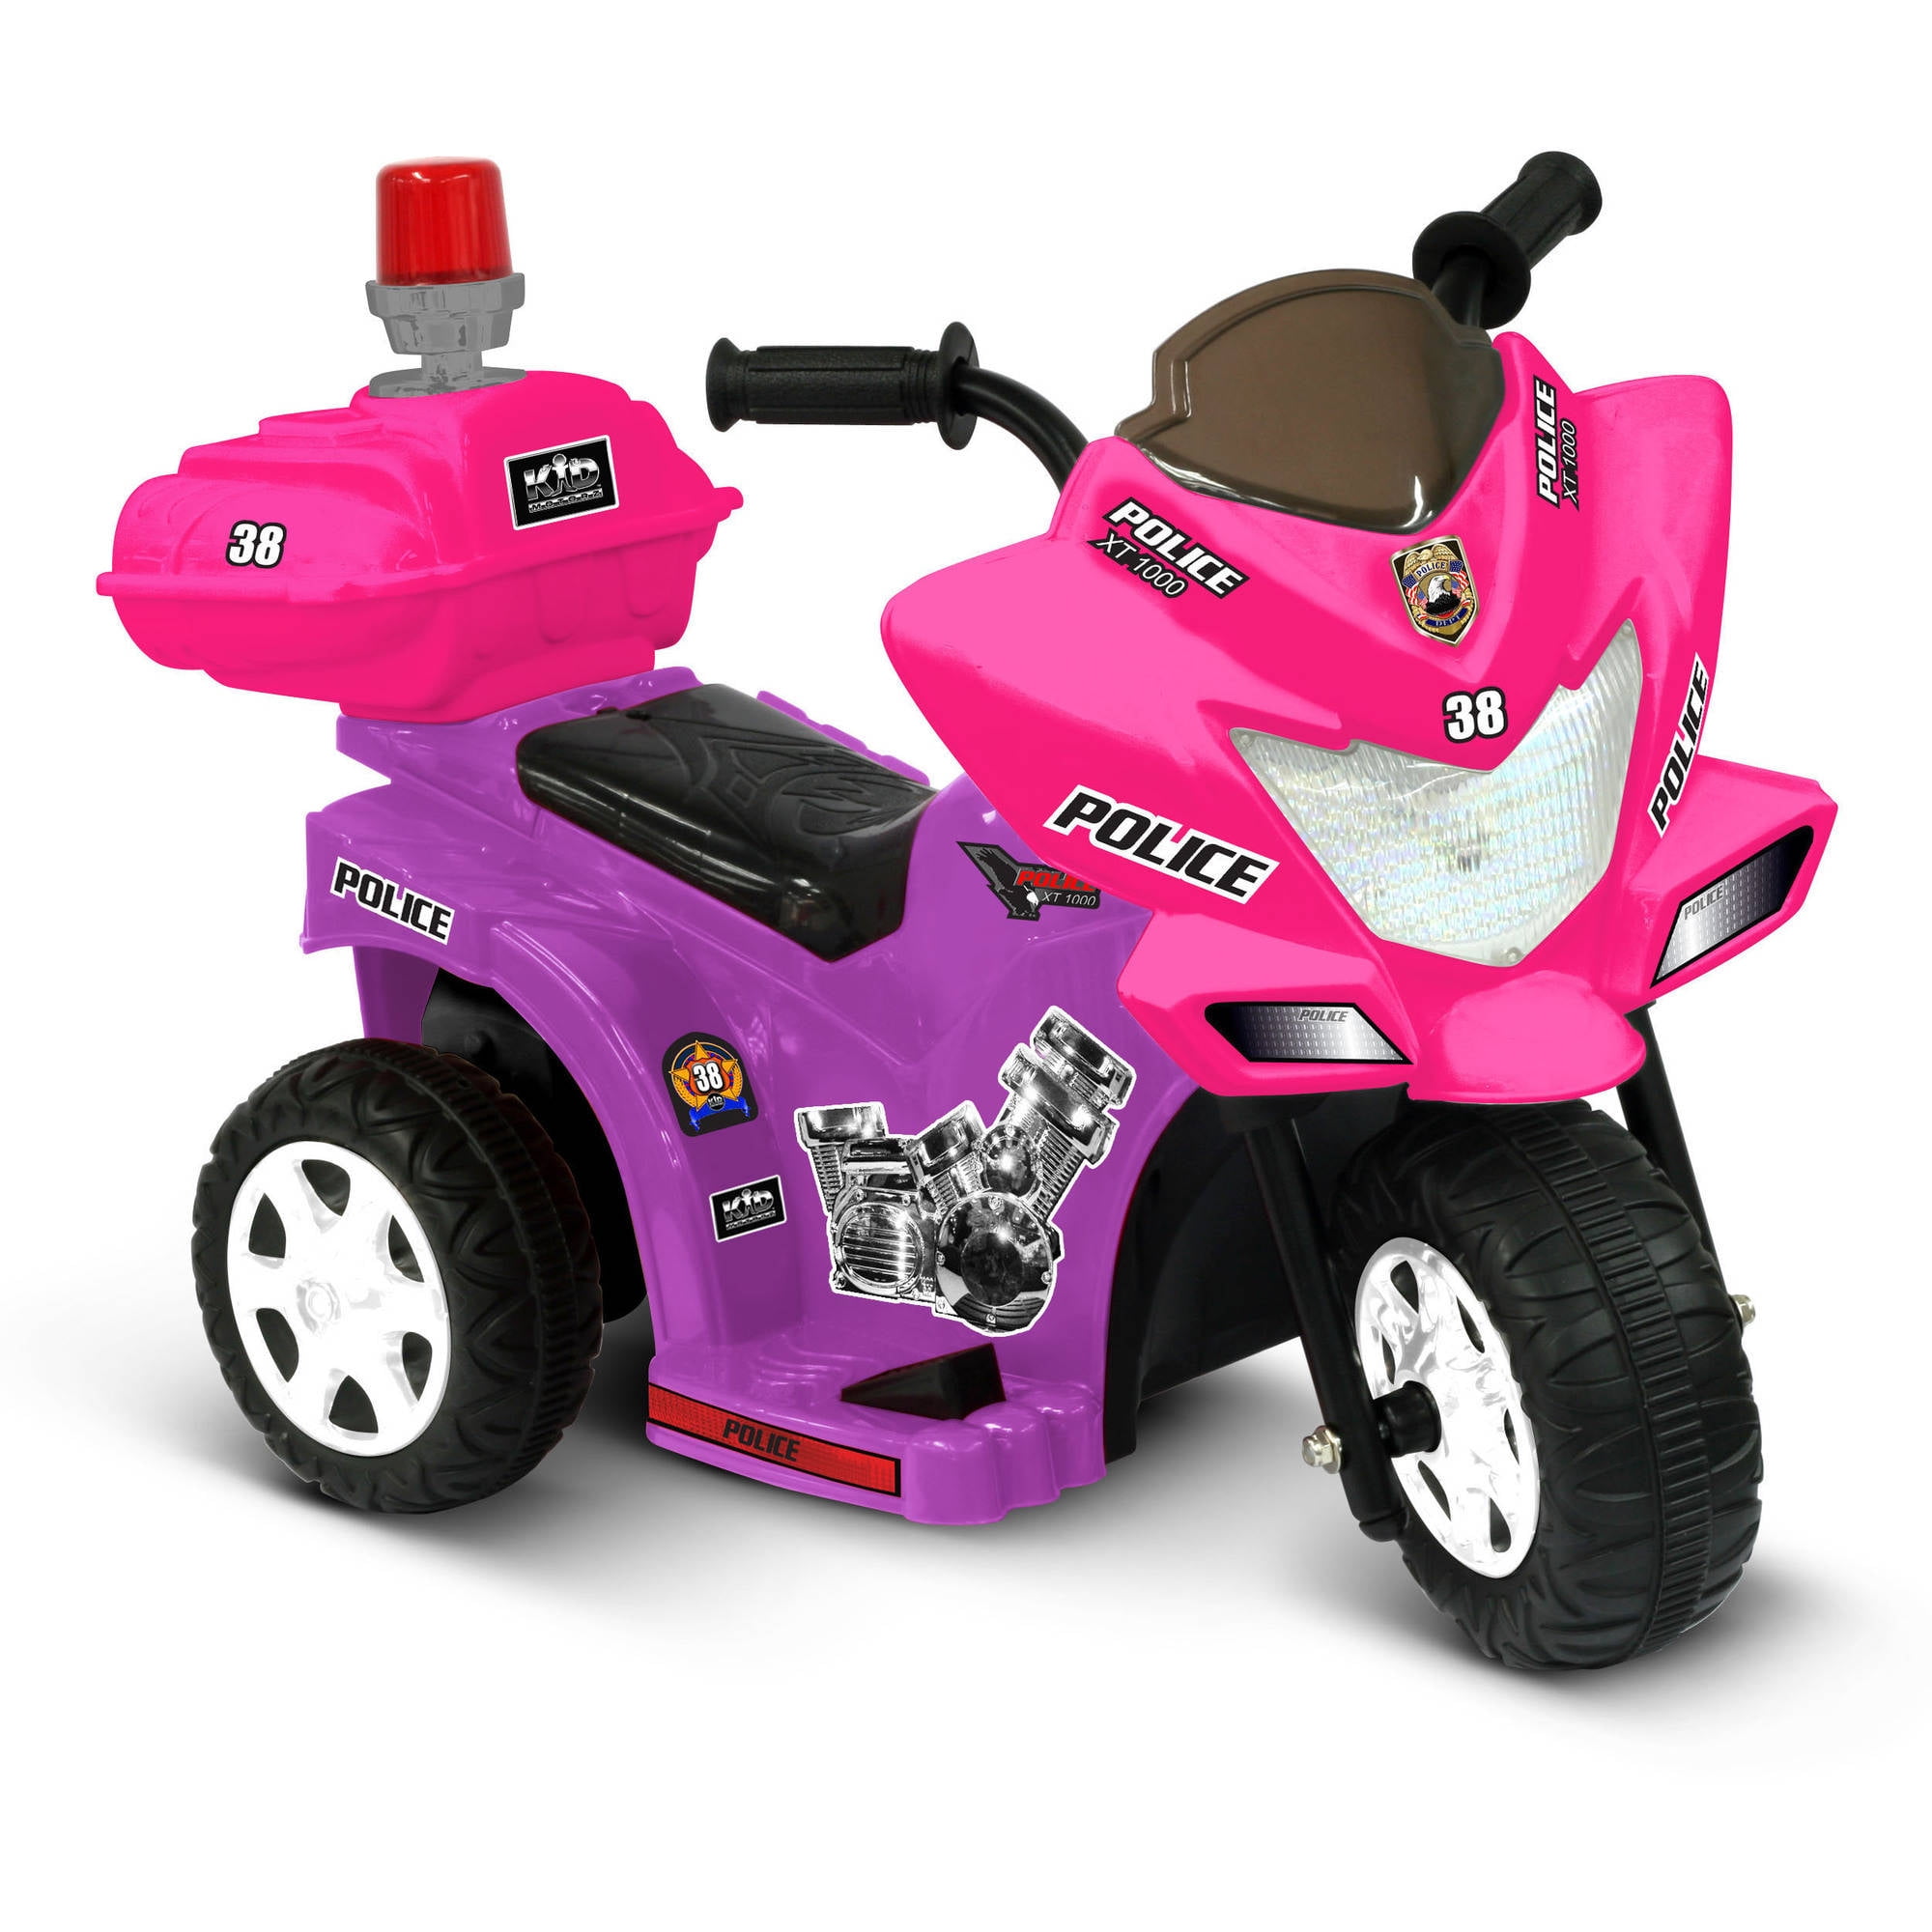 6v Ride on Motorcycle Kids Black & White Lil Police Patrol Battery Powered Cars for sale online 